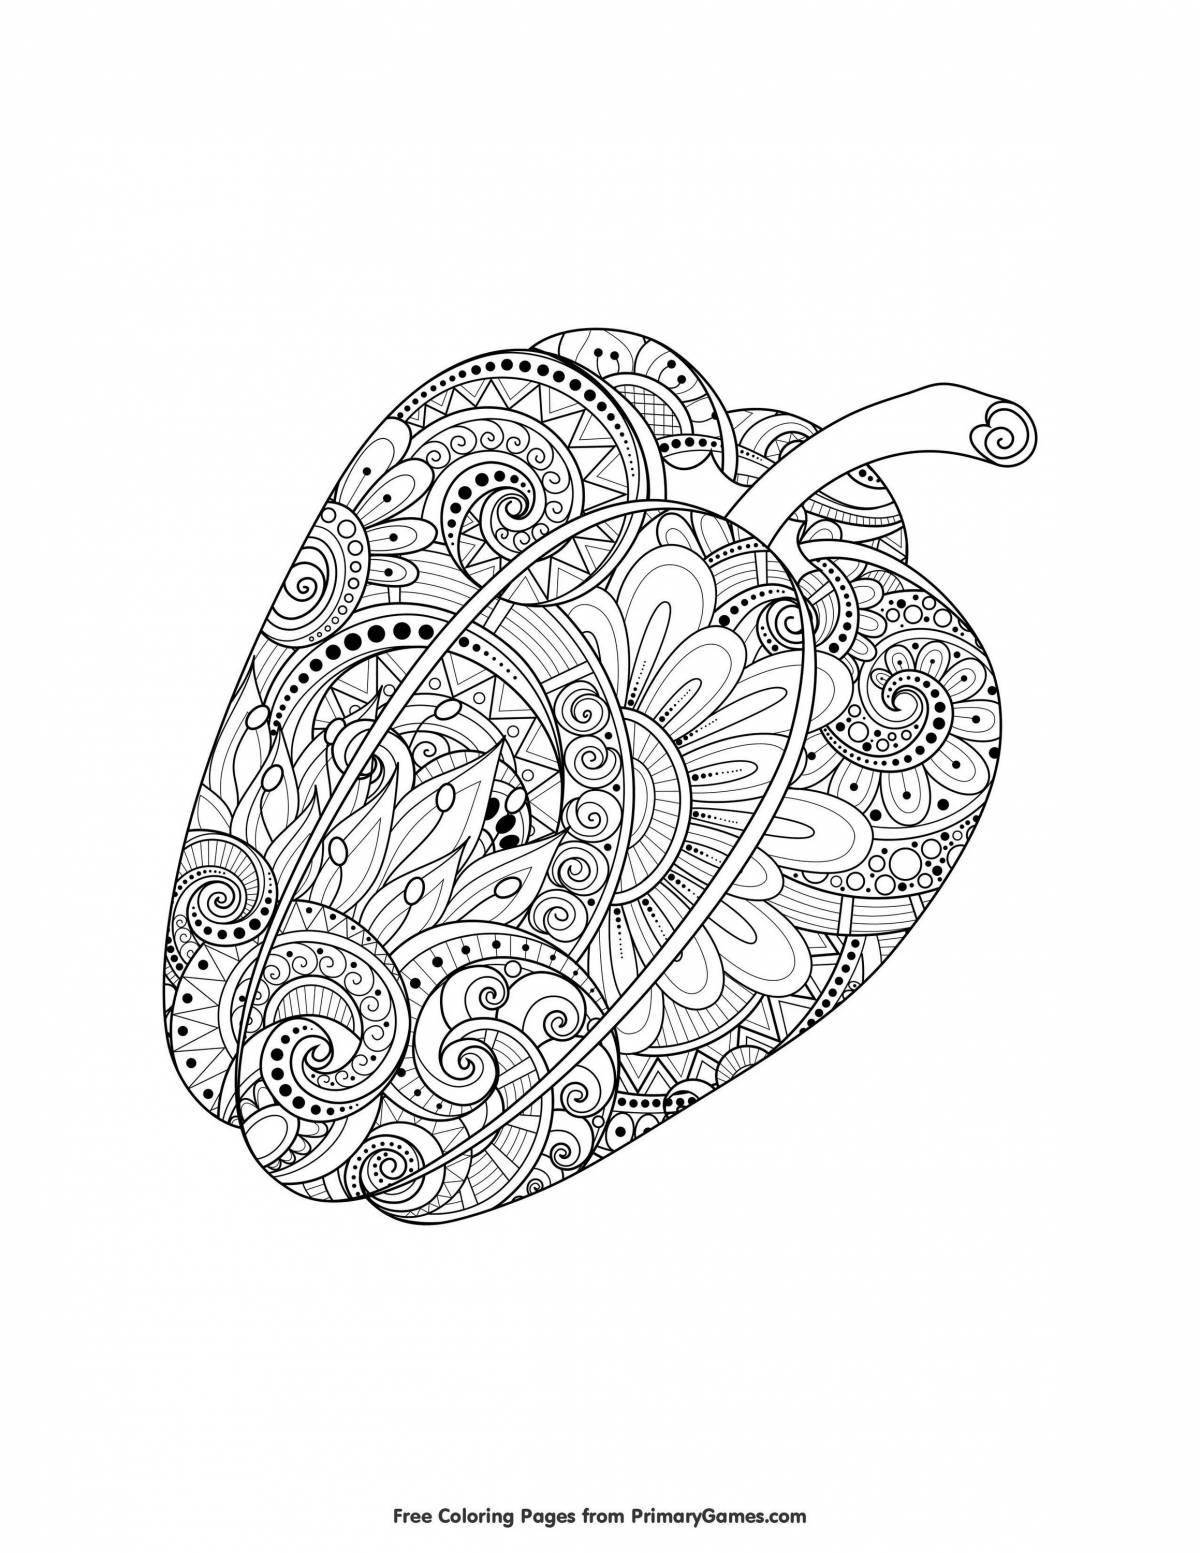 Radiant coloring page antistress fruit